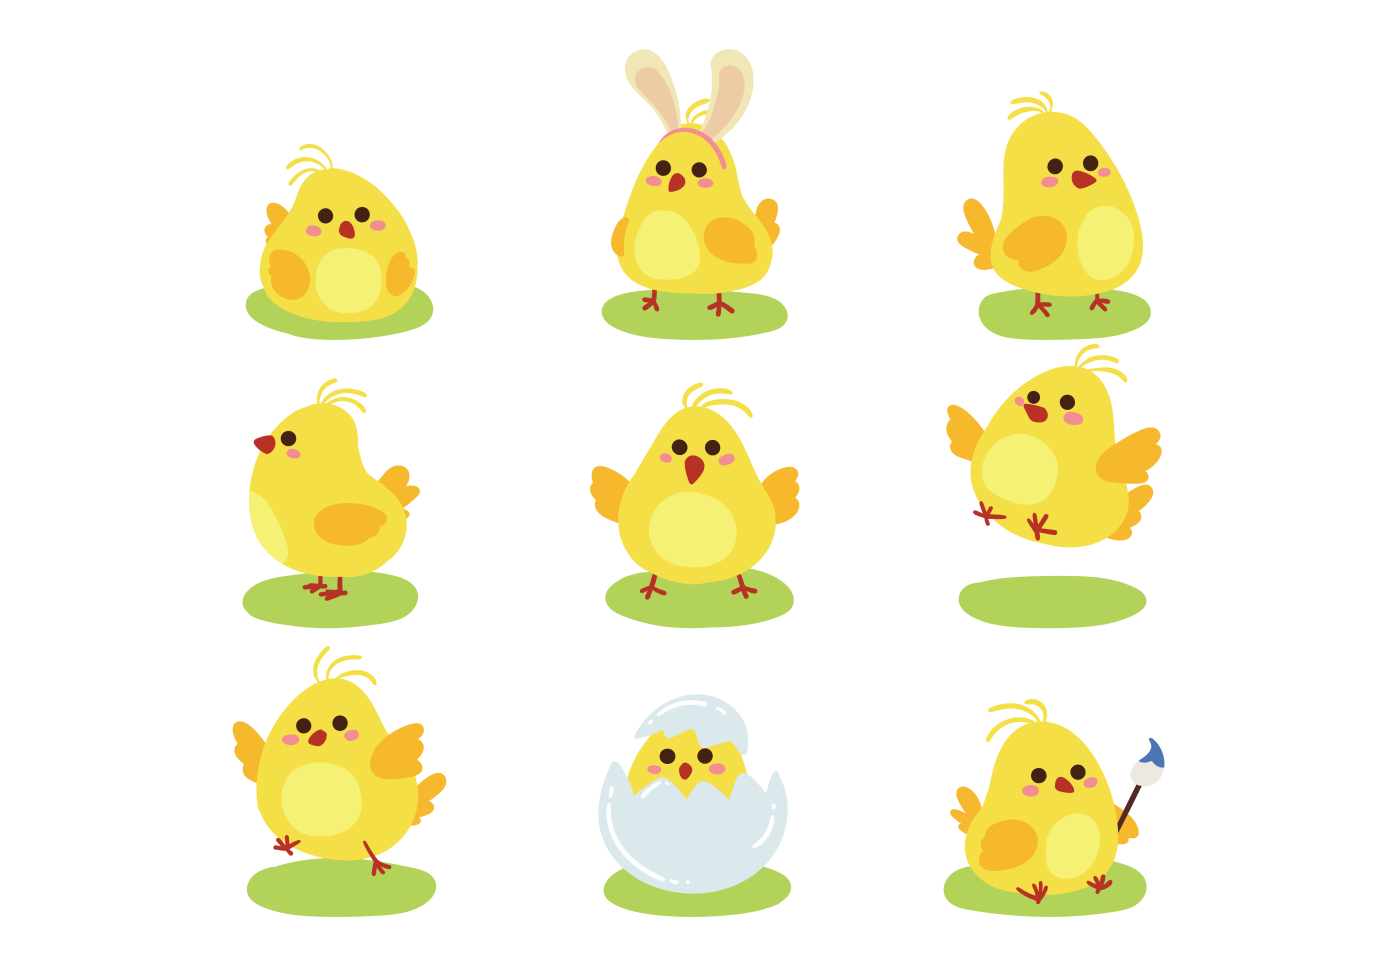 Download the Easter Chick Cute Icons 145074